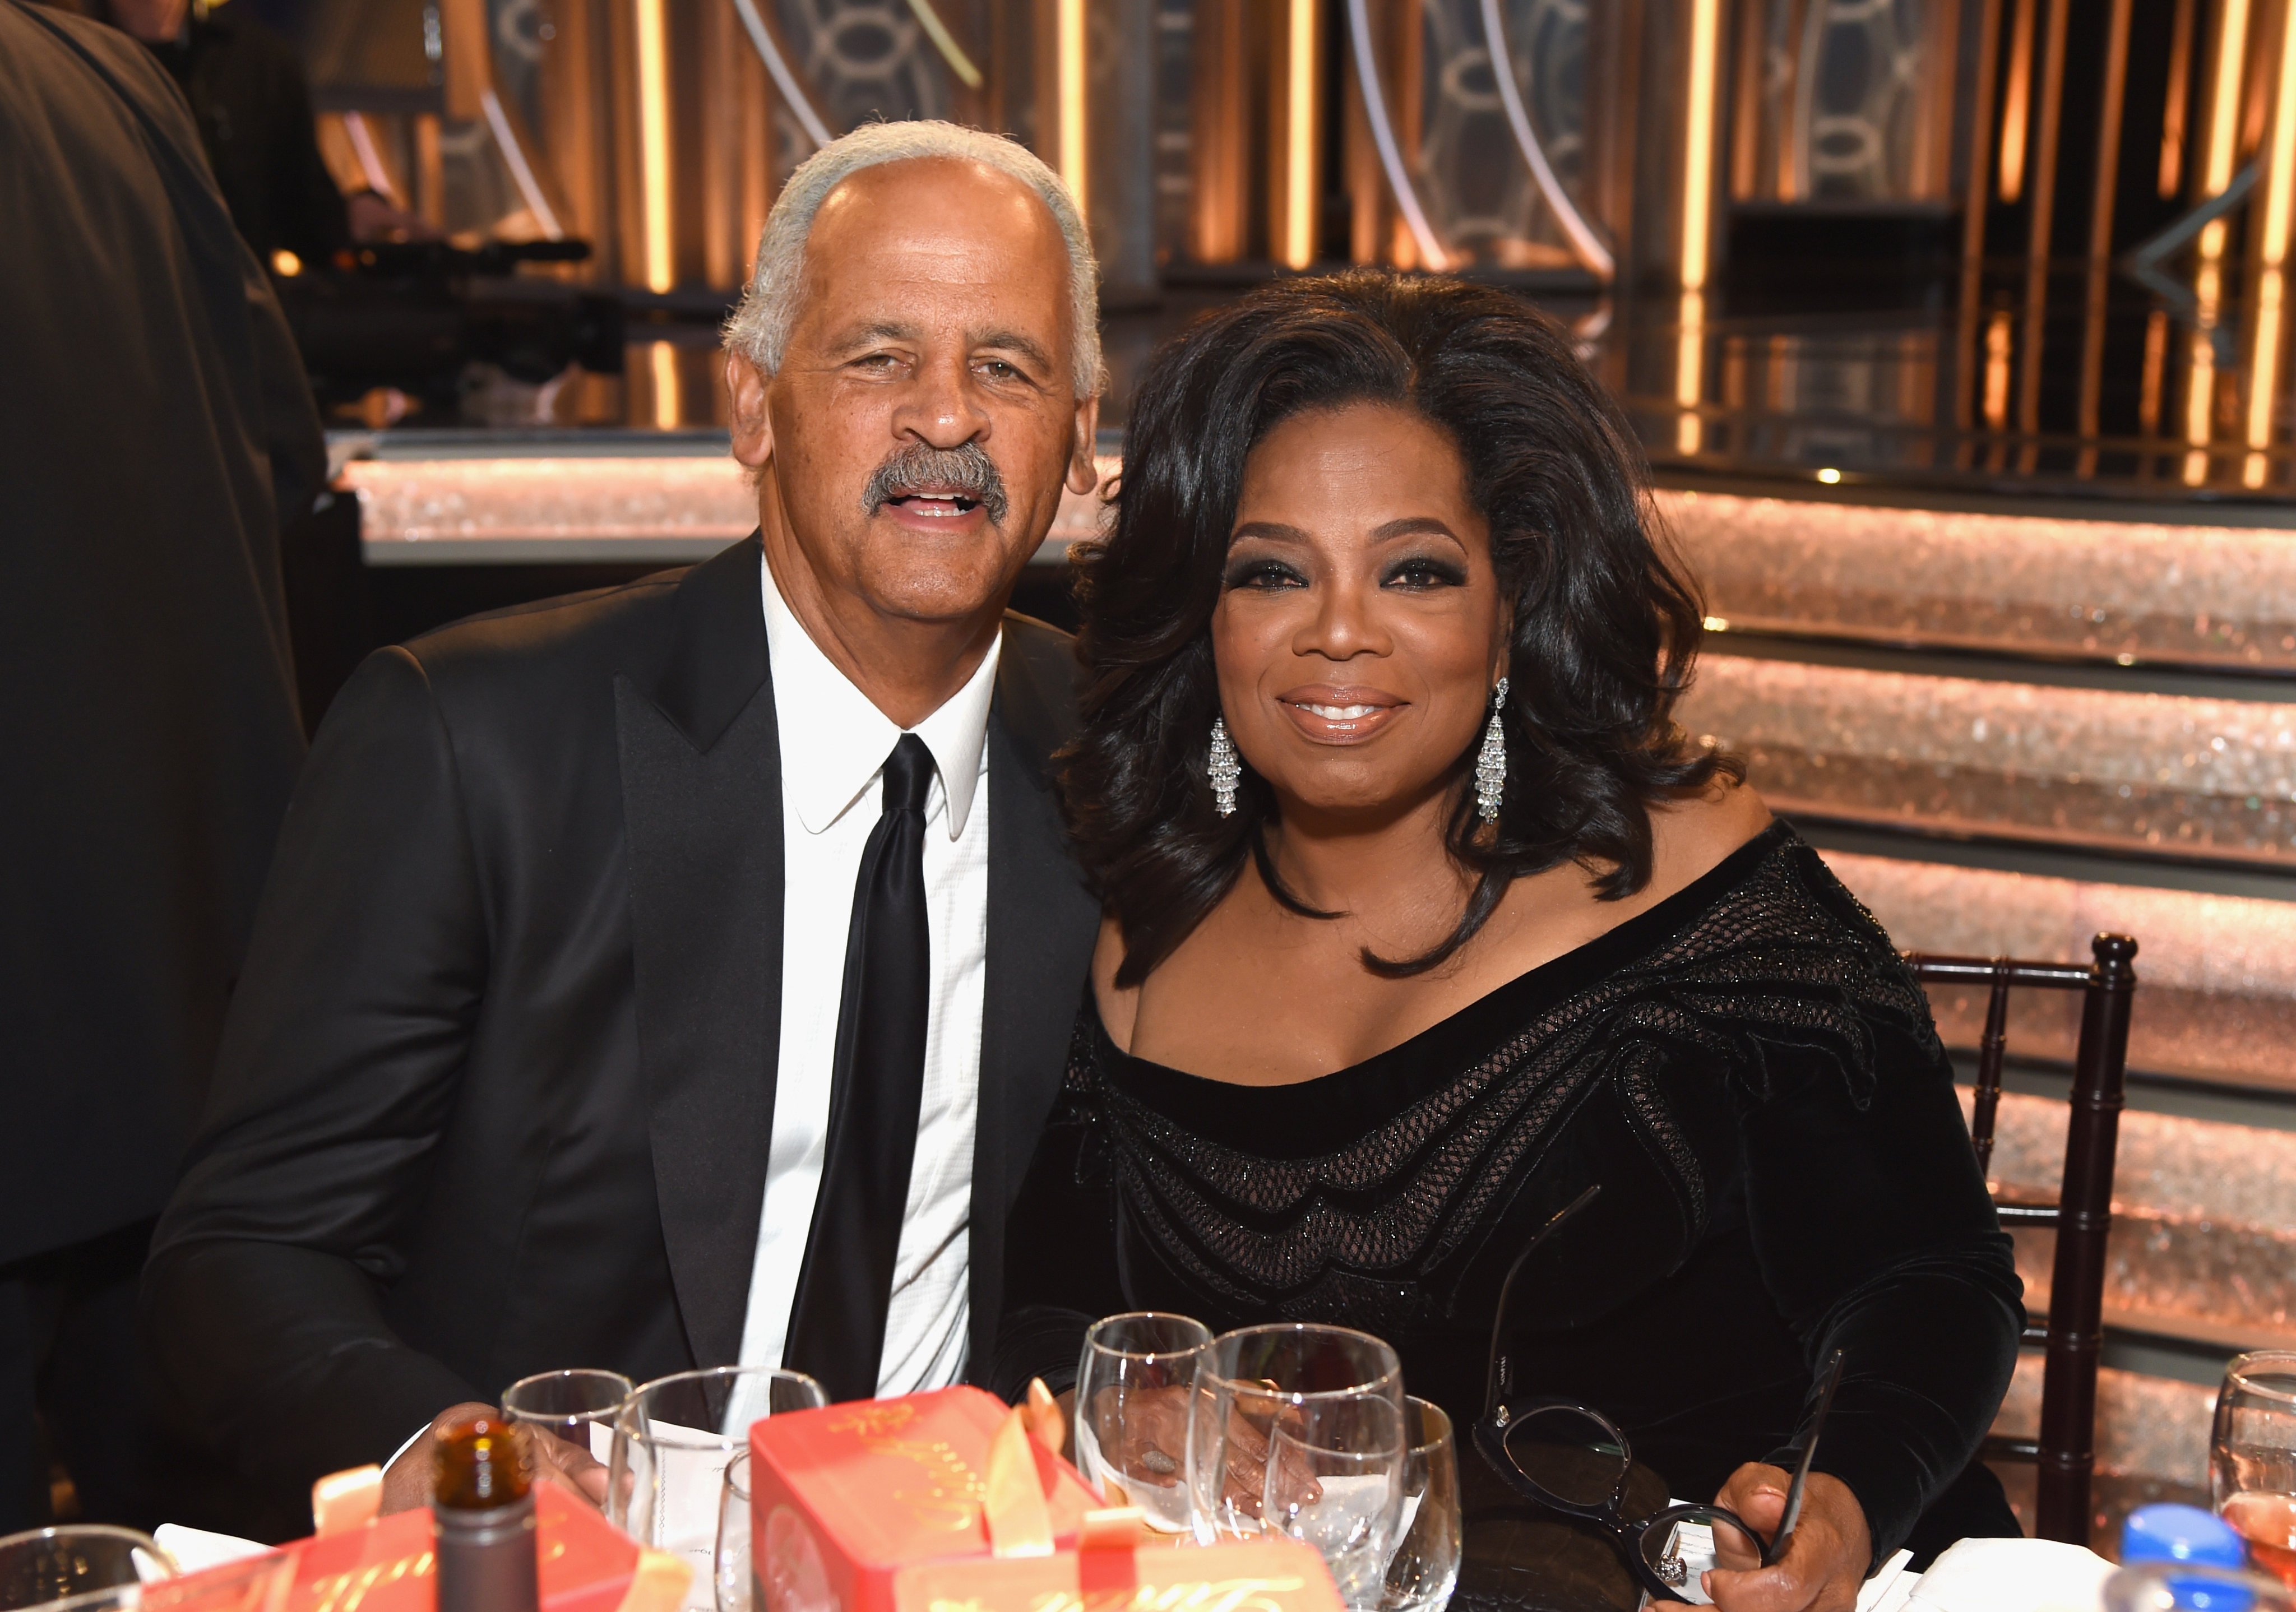 Oprah Winfrey’s (right) spiritual relationship with Stedman Graham has transformed her life, she says. We get an expert opinion on what makes a relationship spiritual and how it can benefit you and your partner in many ways. Photo: Getty Images